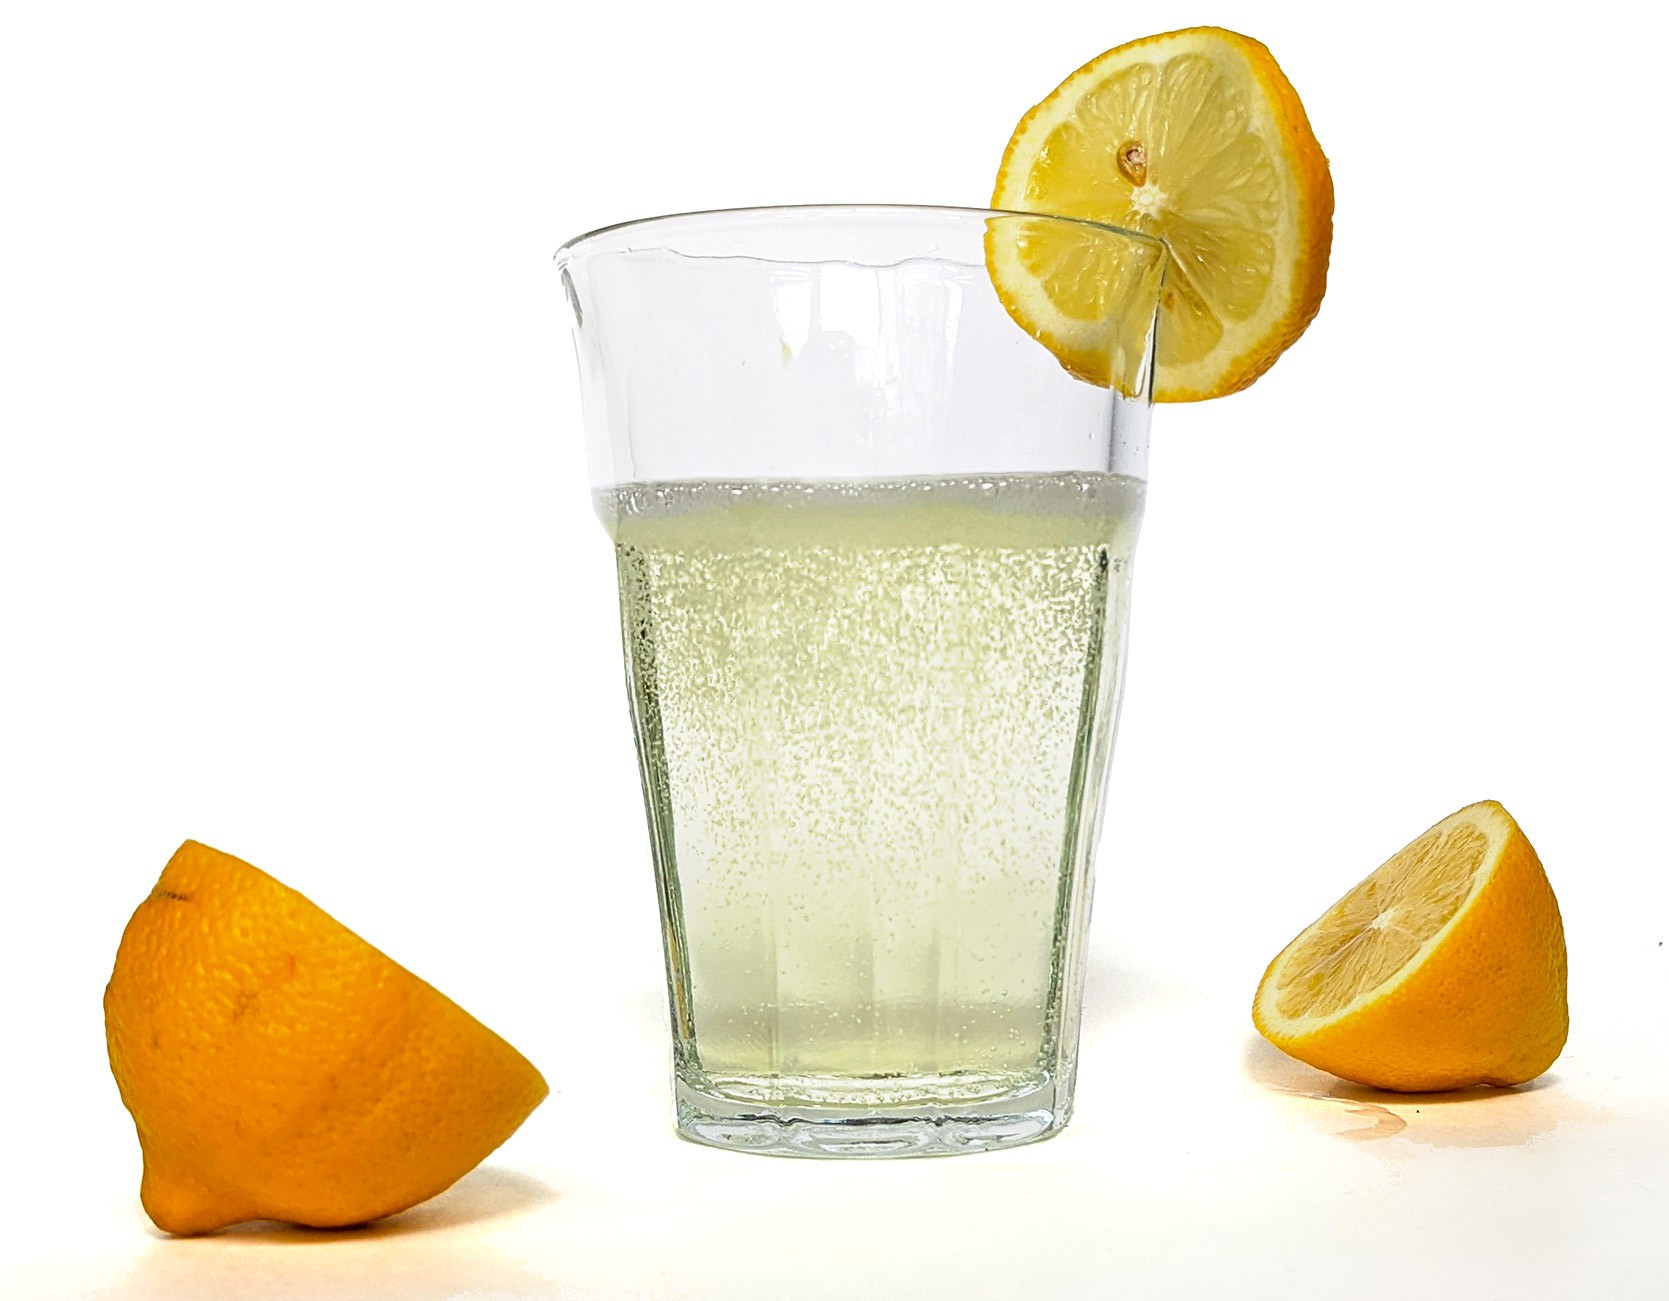 Fizzing yellow lemonade in a clear glass surrounded by sliced lemons.  